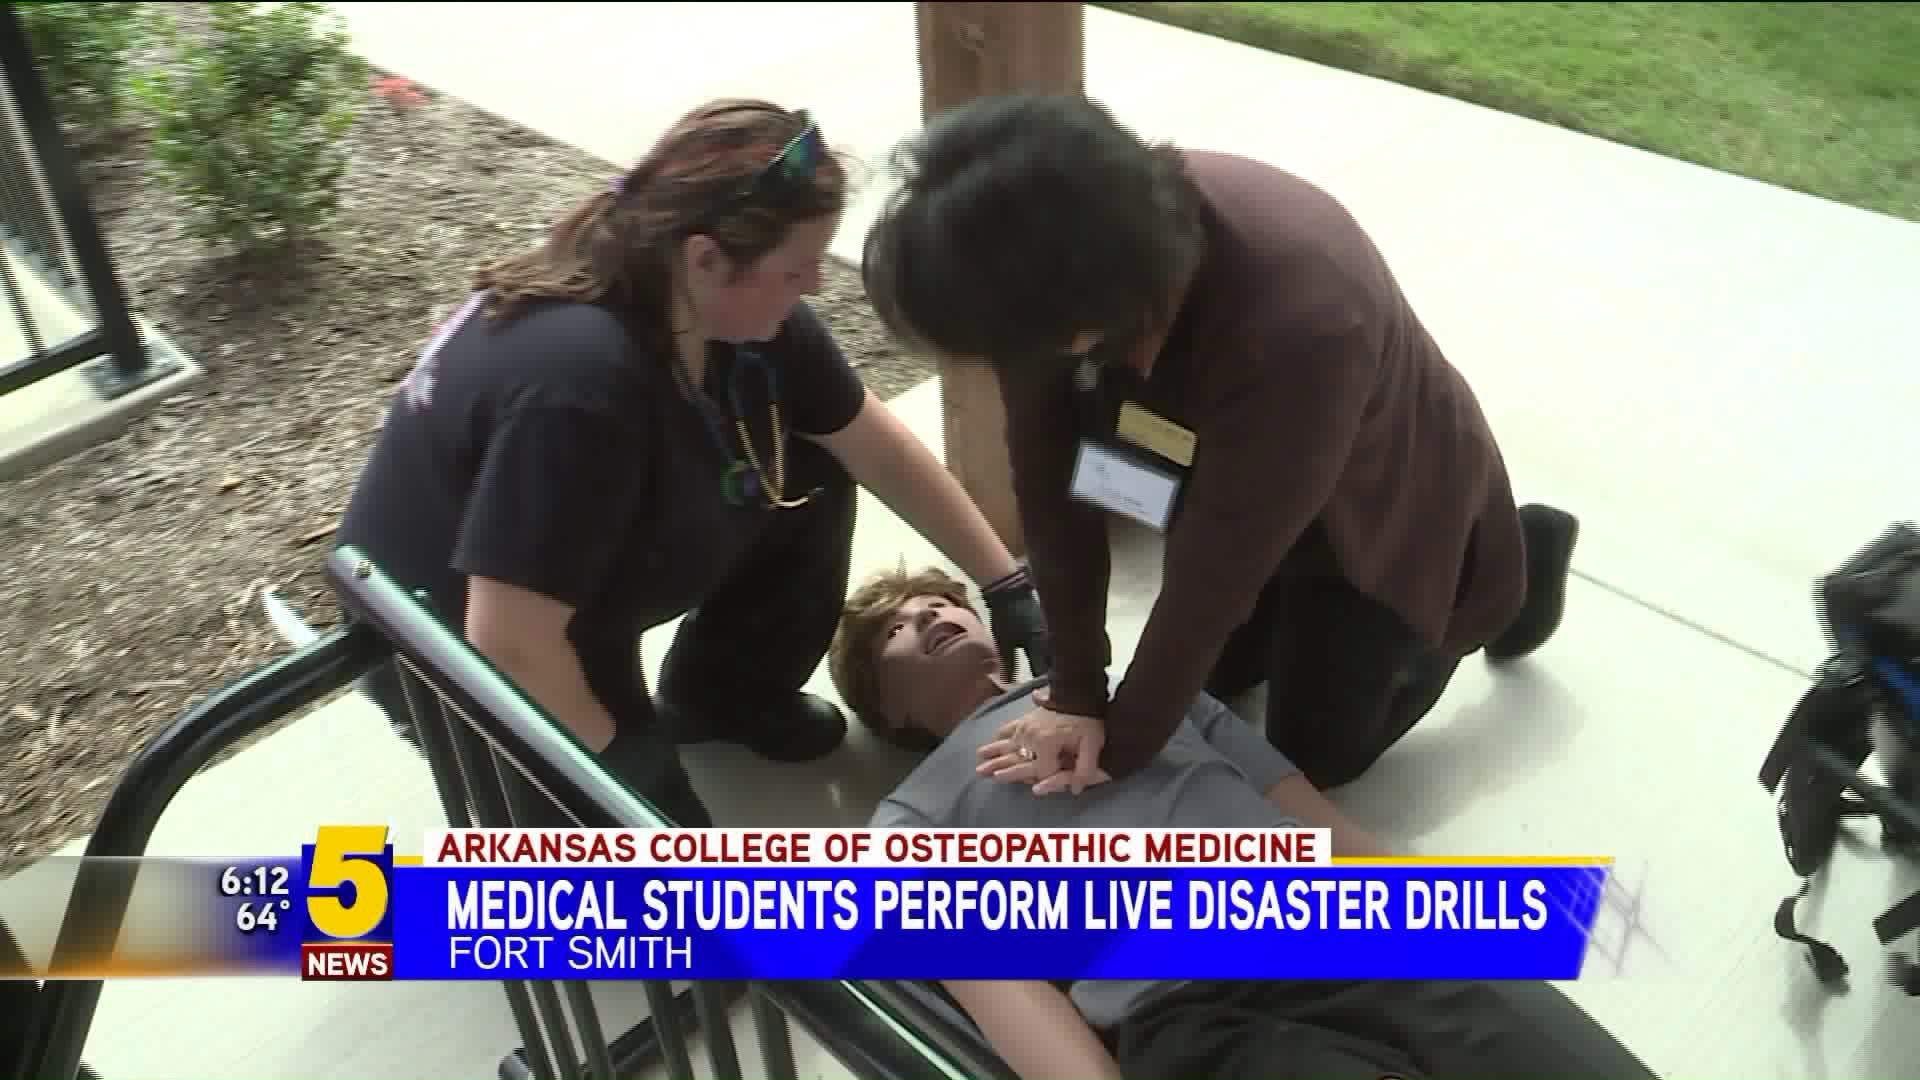 Live Disaster Drills